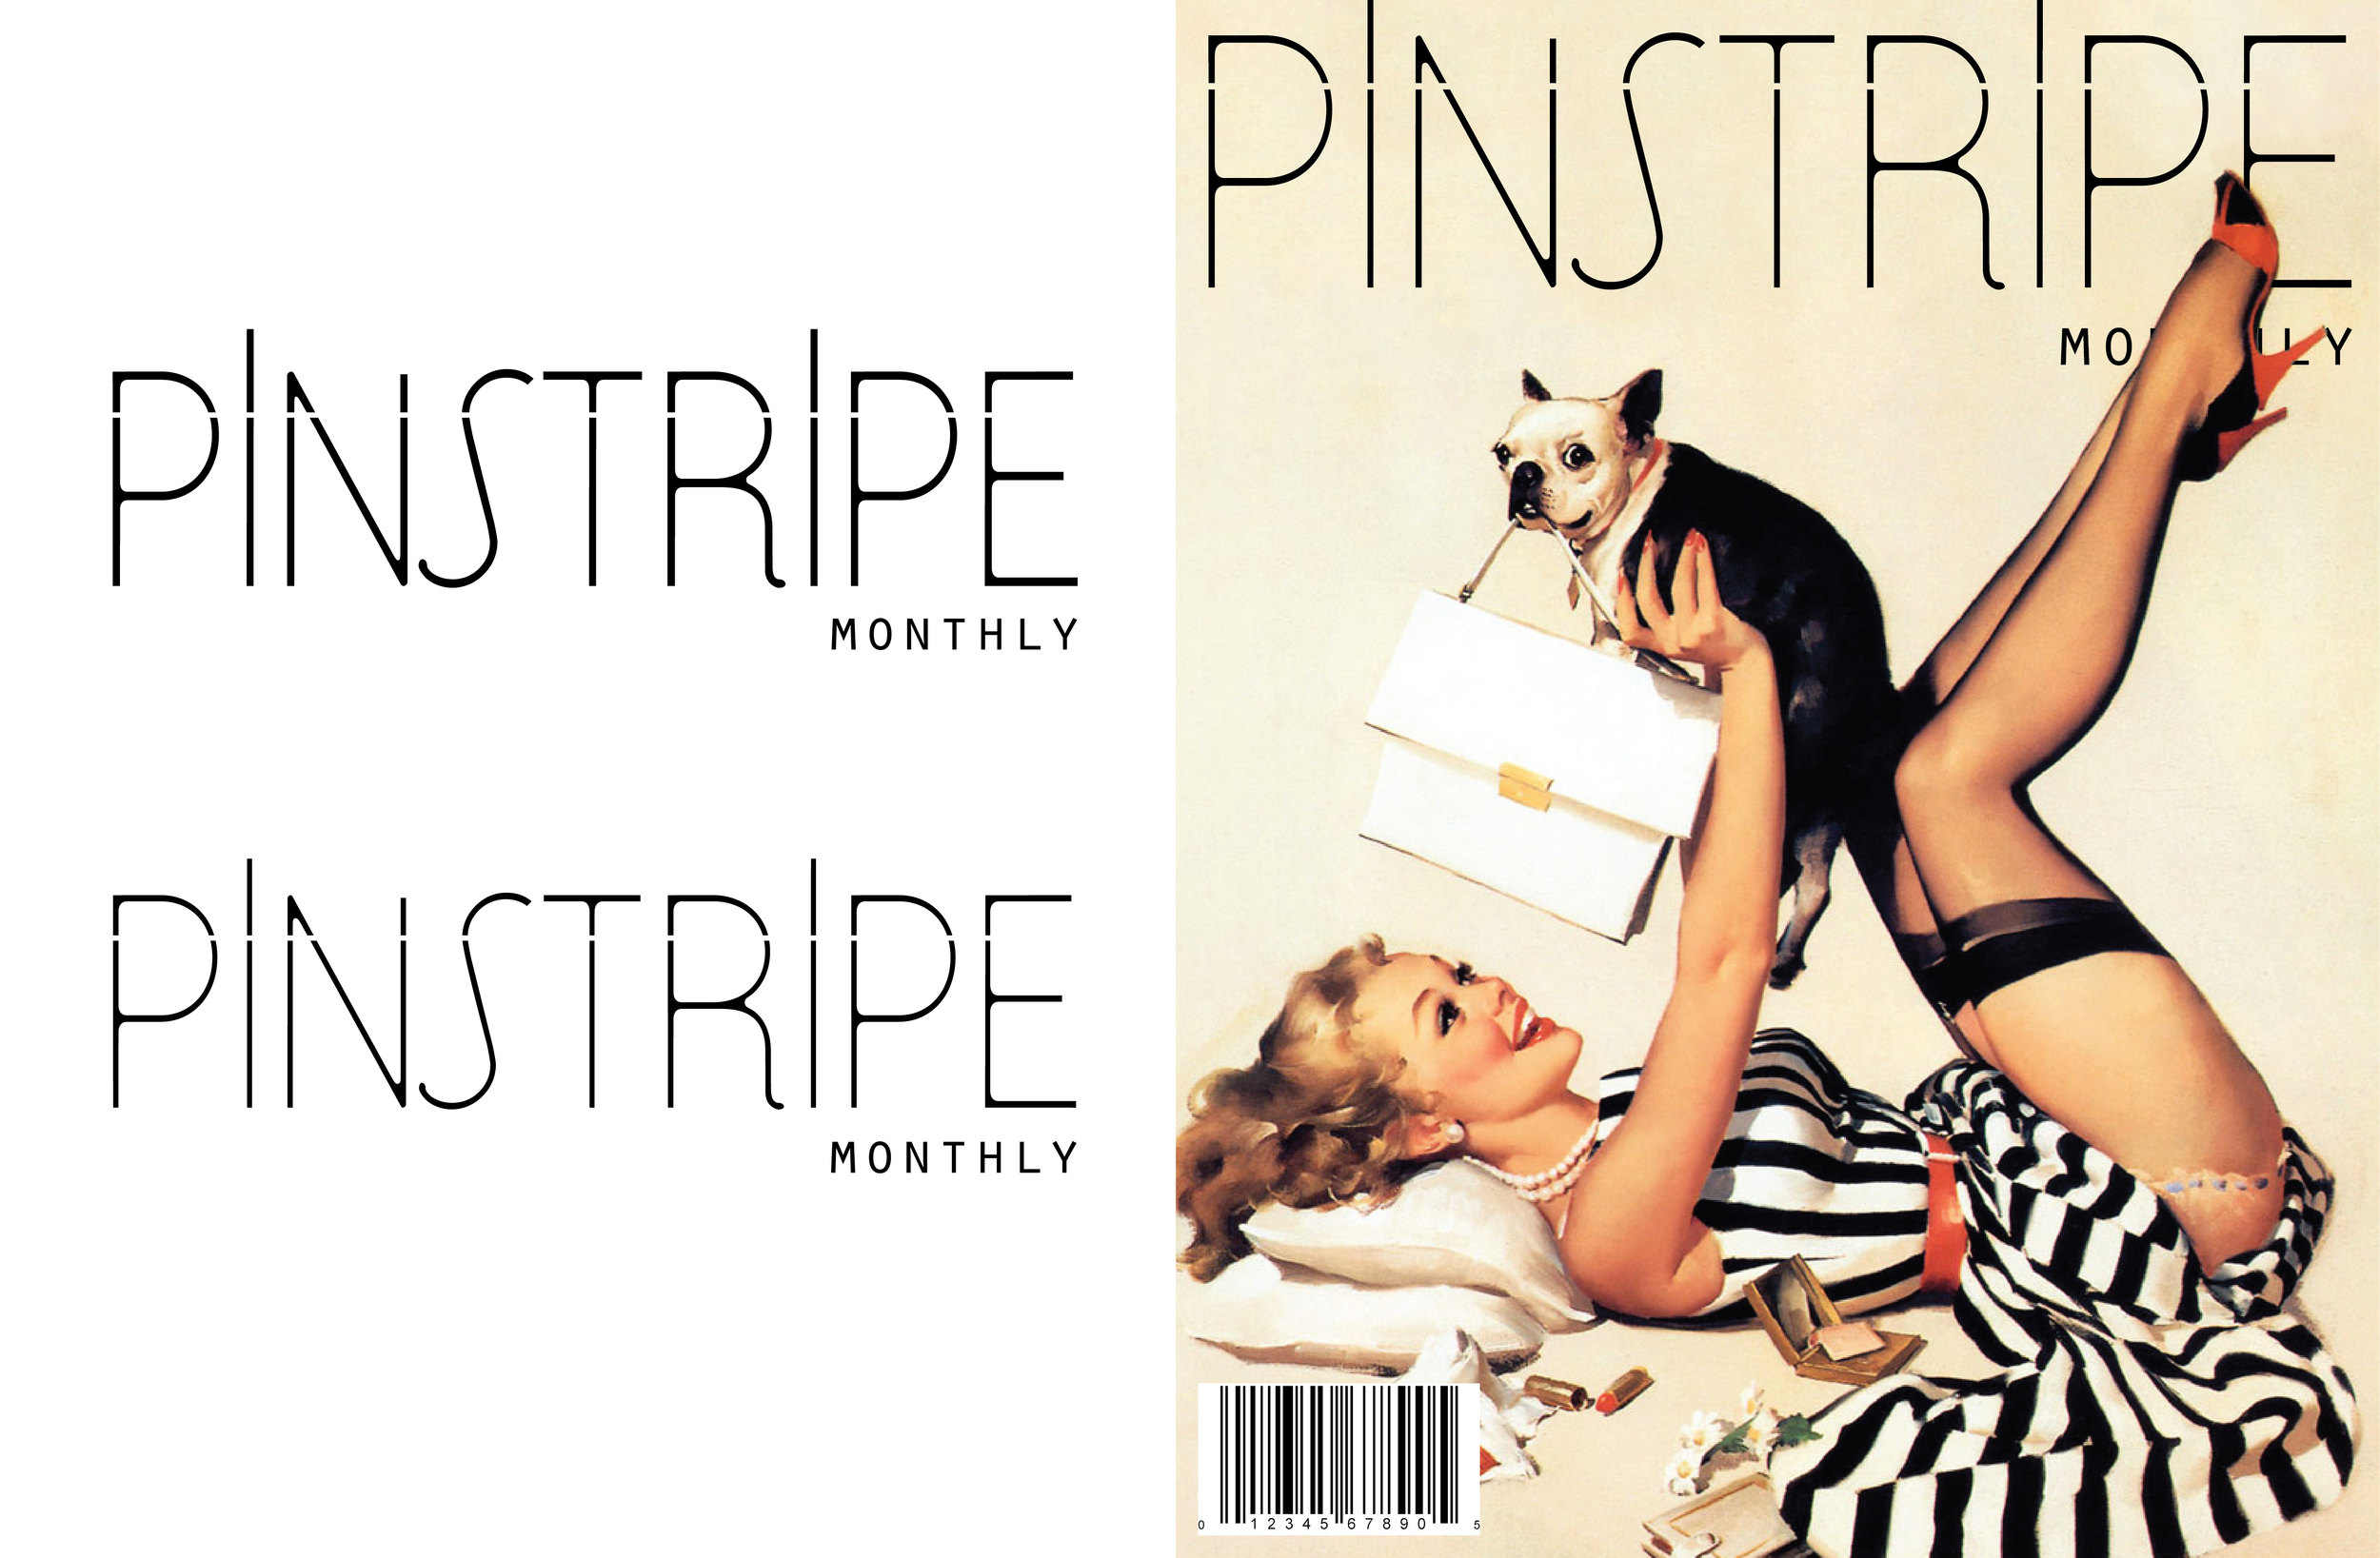 Pinstripe Monthly